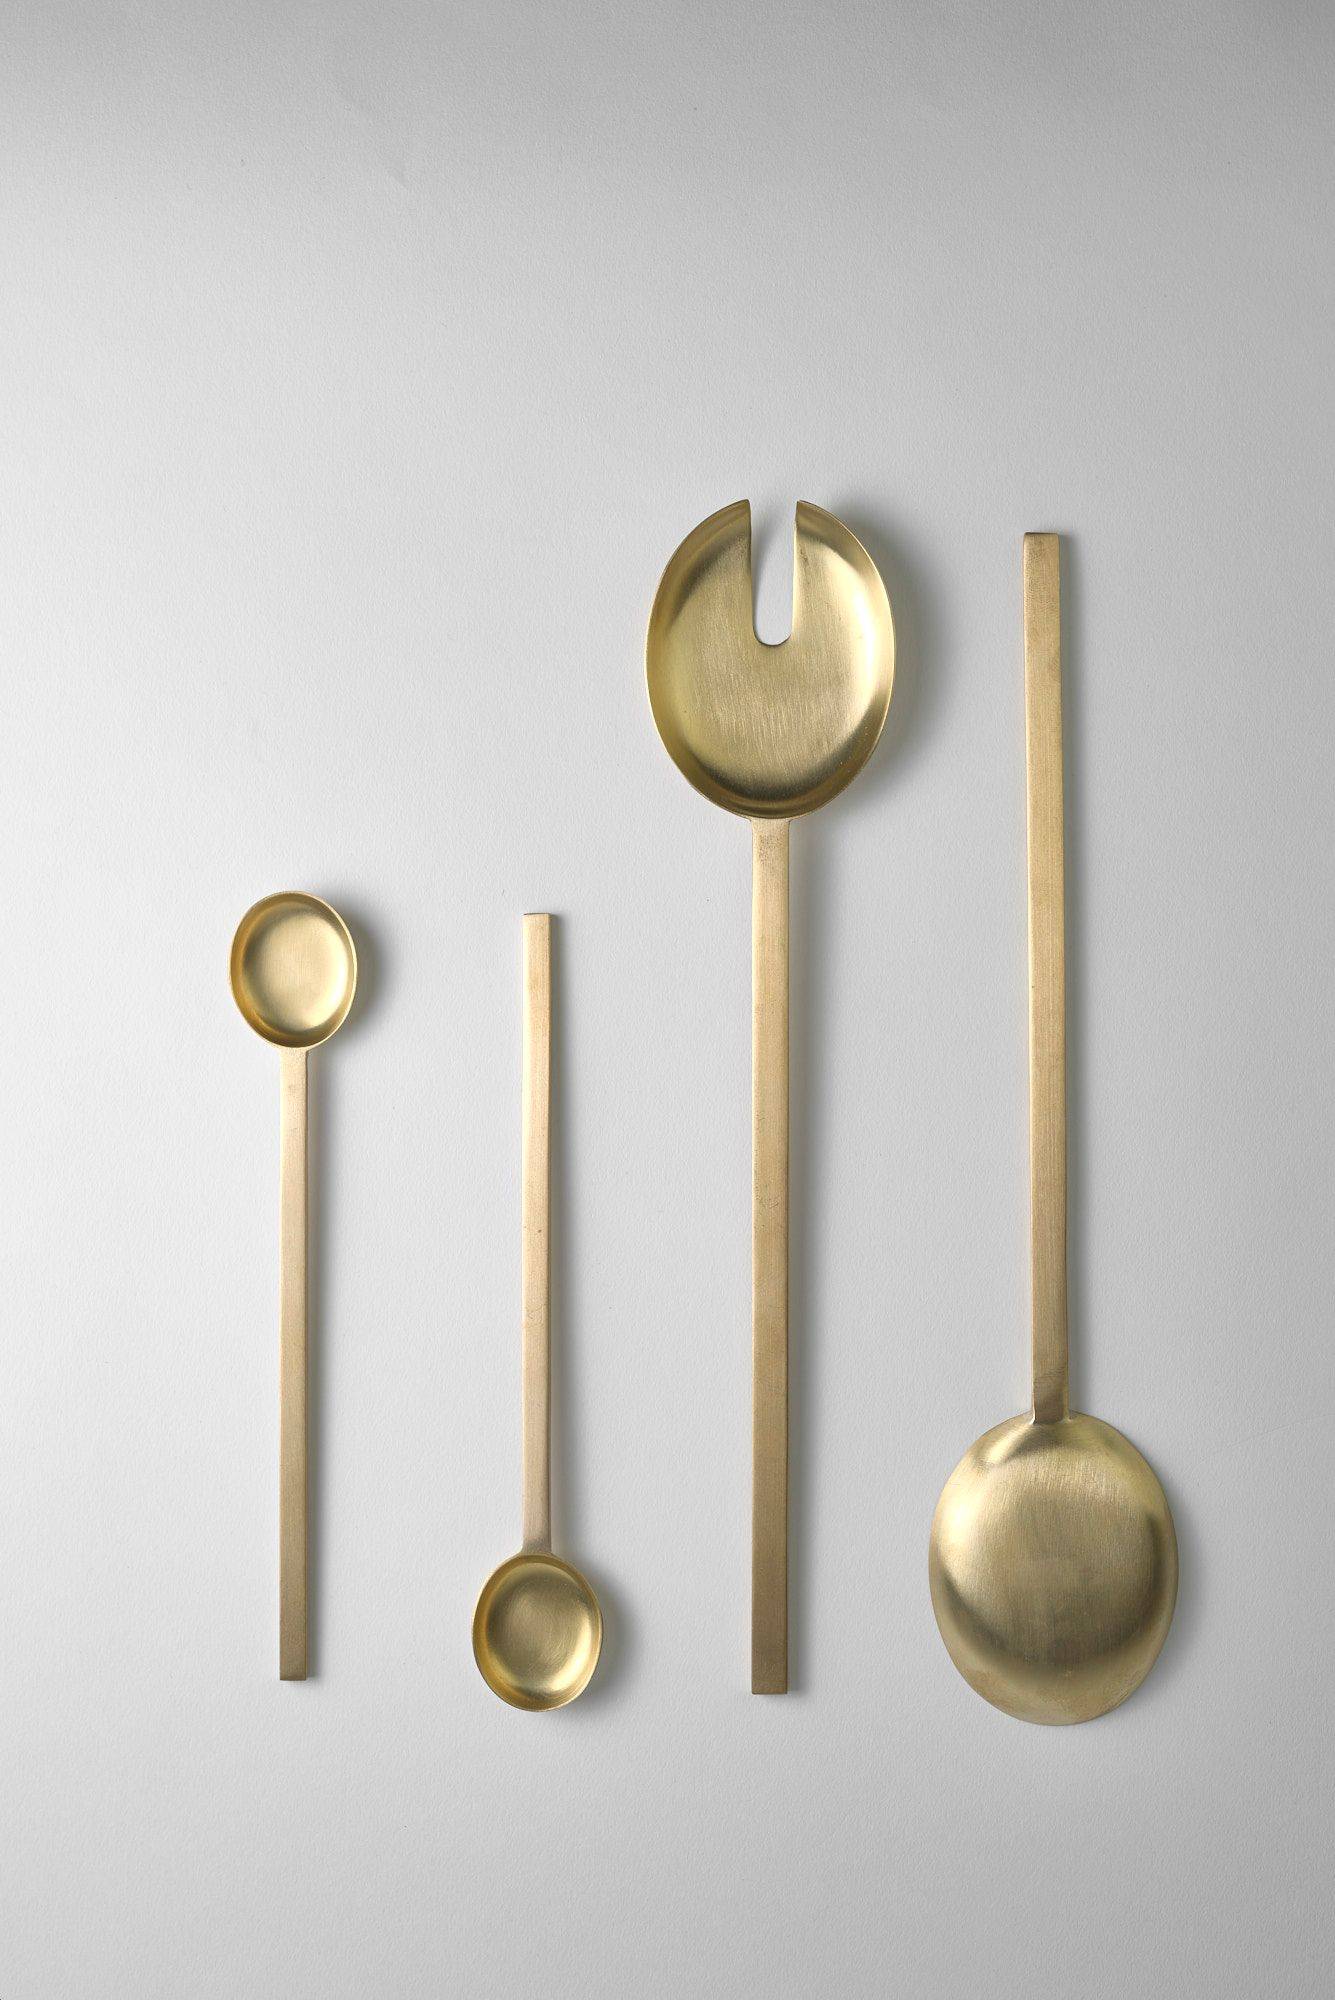 brass spoons by danish ferm living on white background